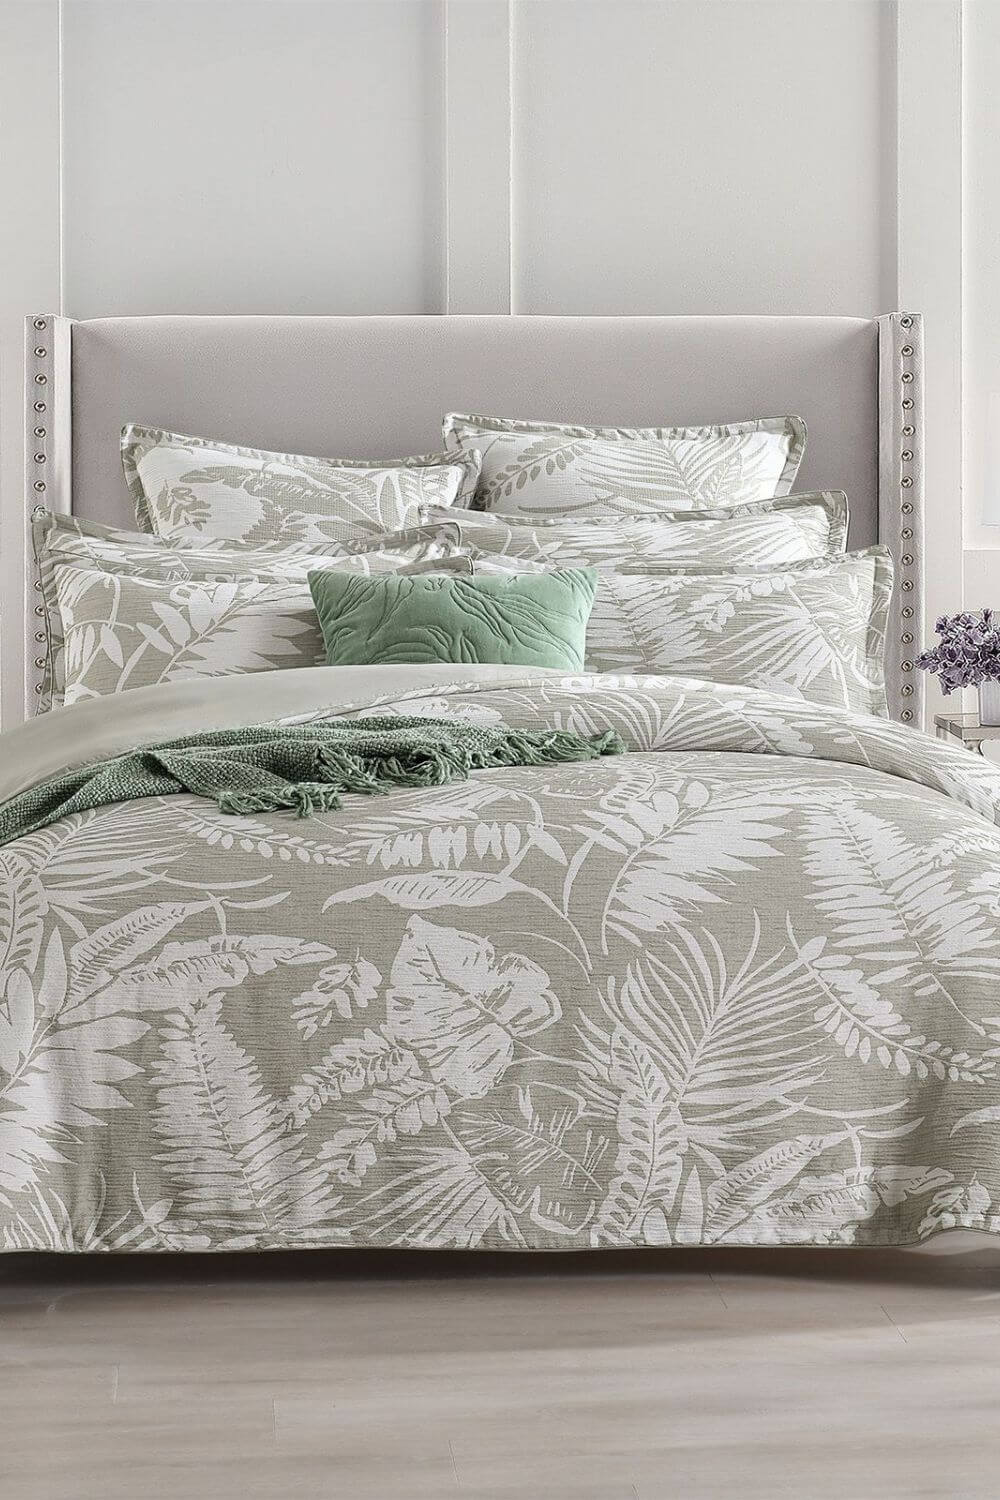 Renee Taylor Palm Tree Jacquard Quilt Cover Set - King